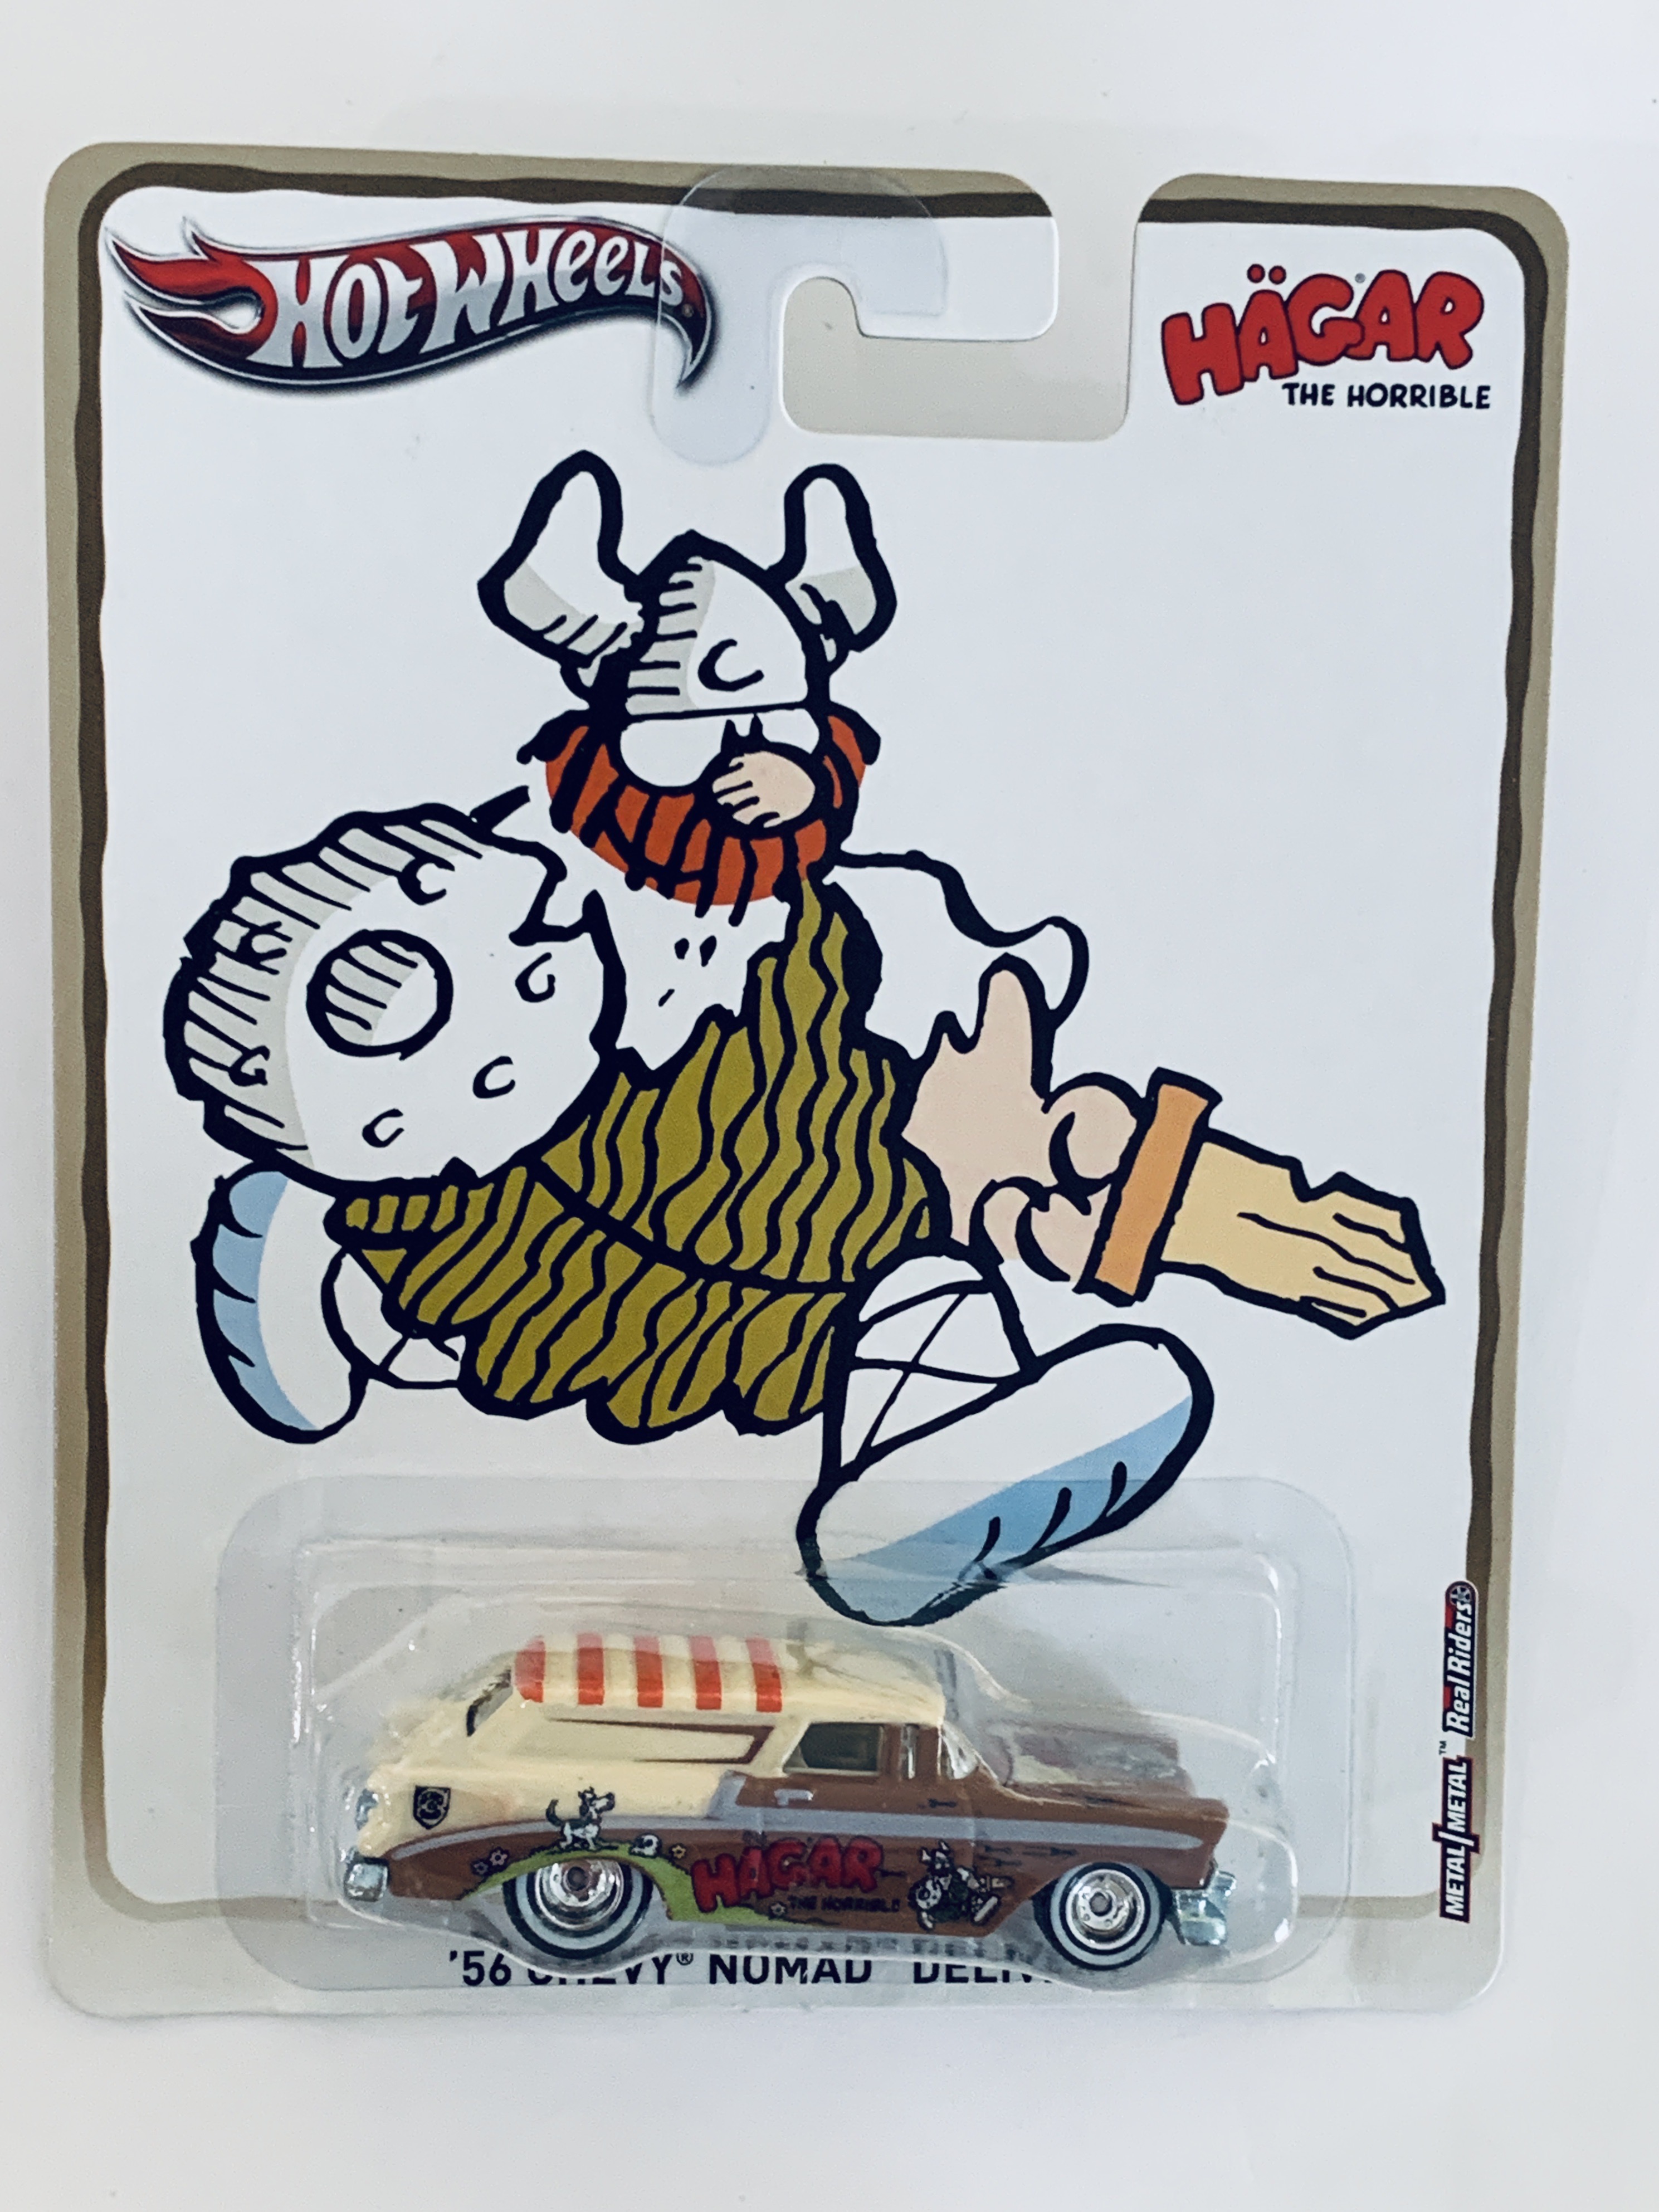 Hot Wheels Hagar The Horrible '56 Chevy Nomad Delivery